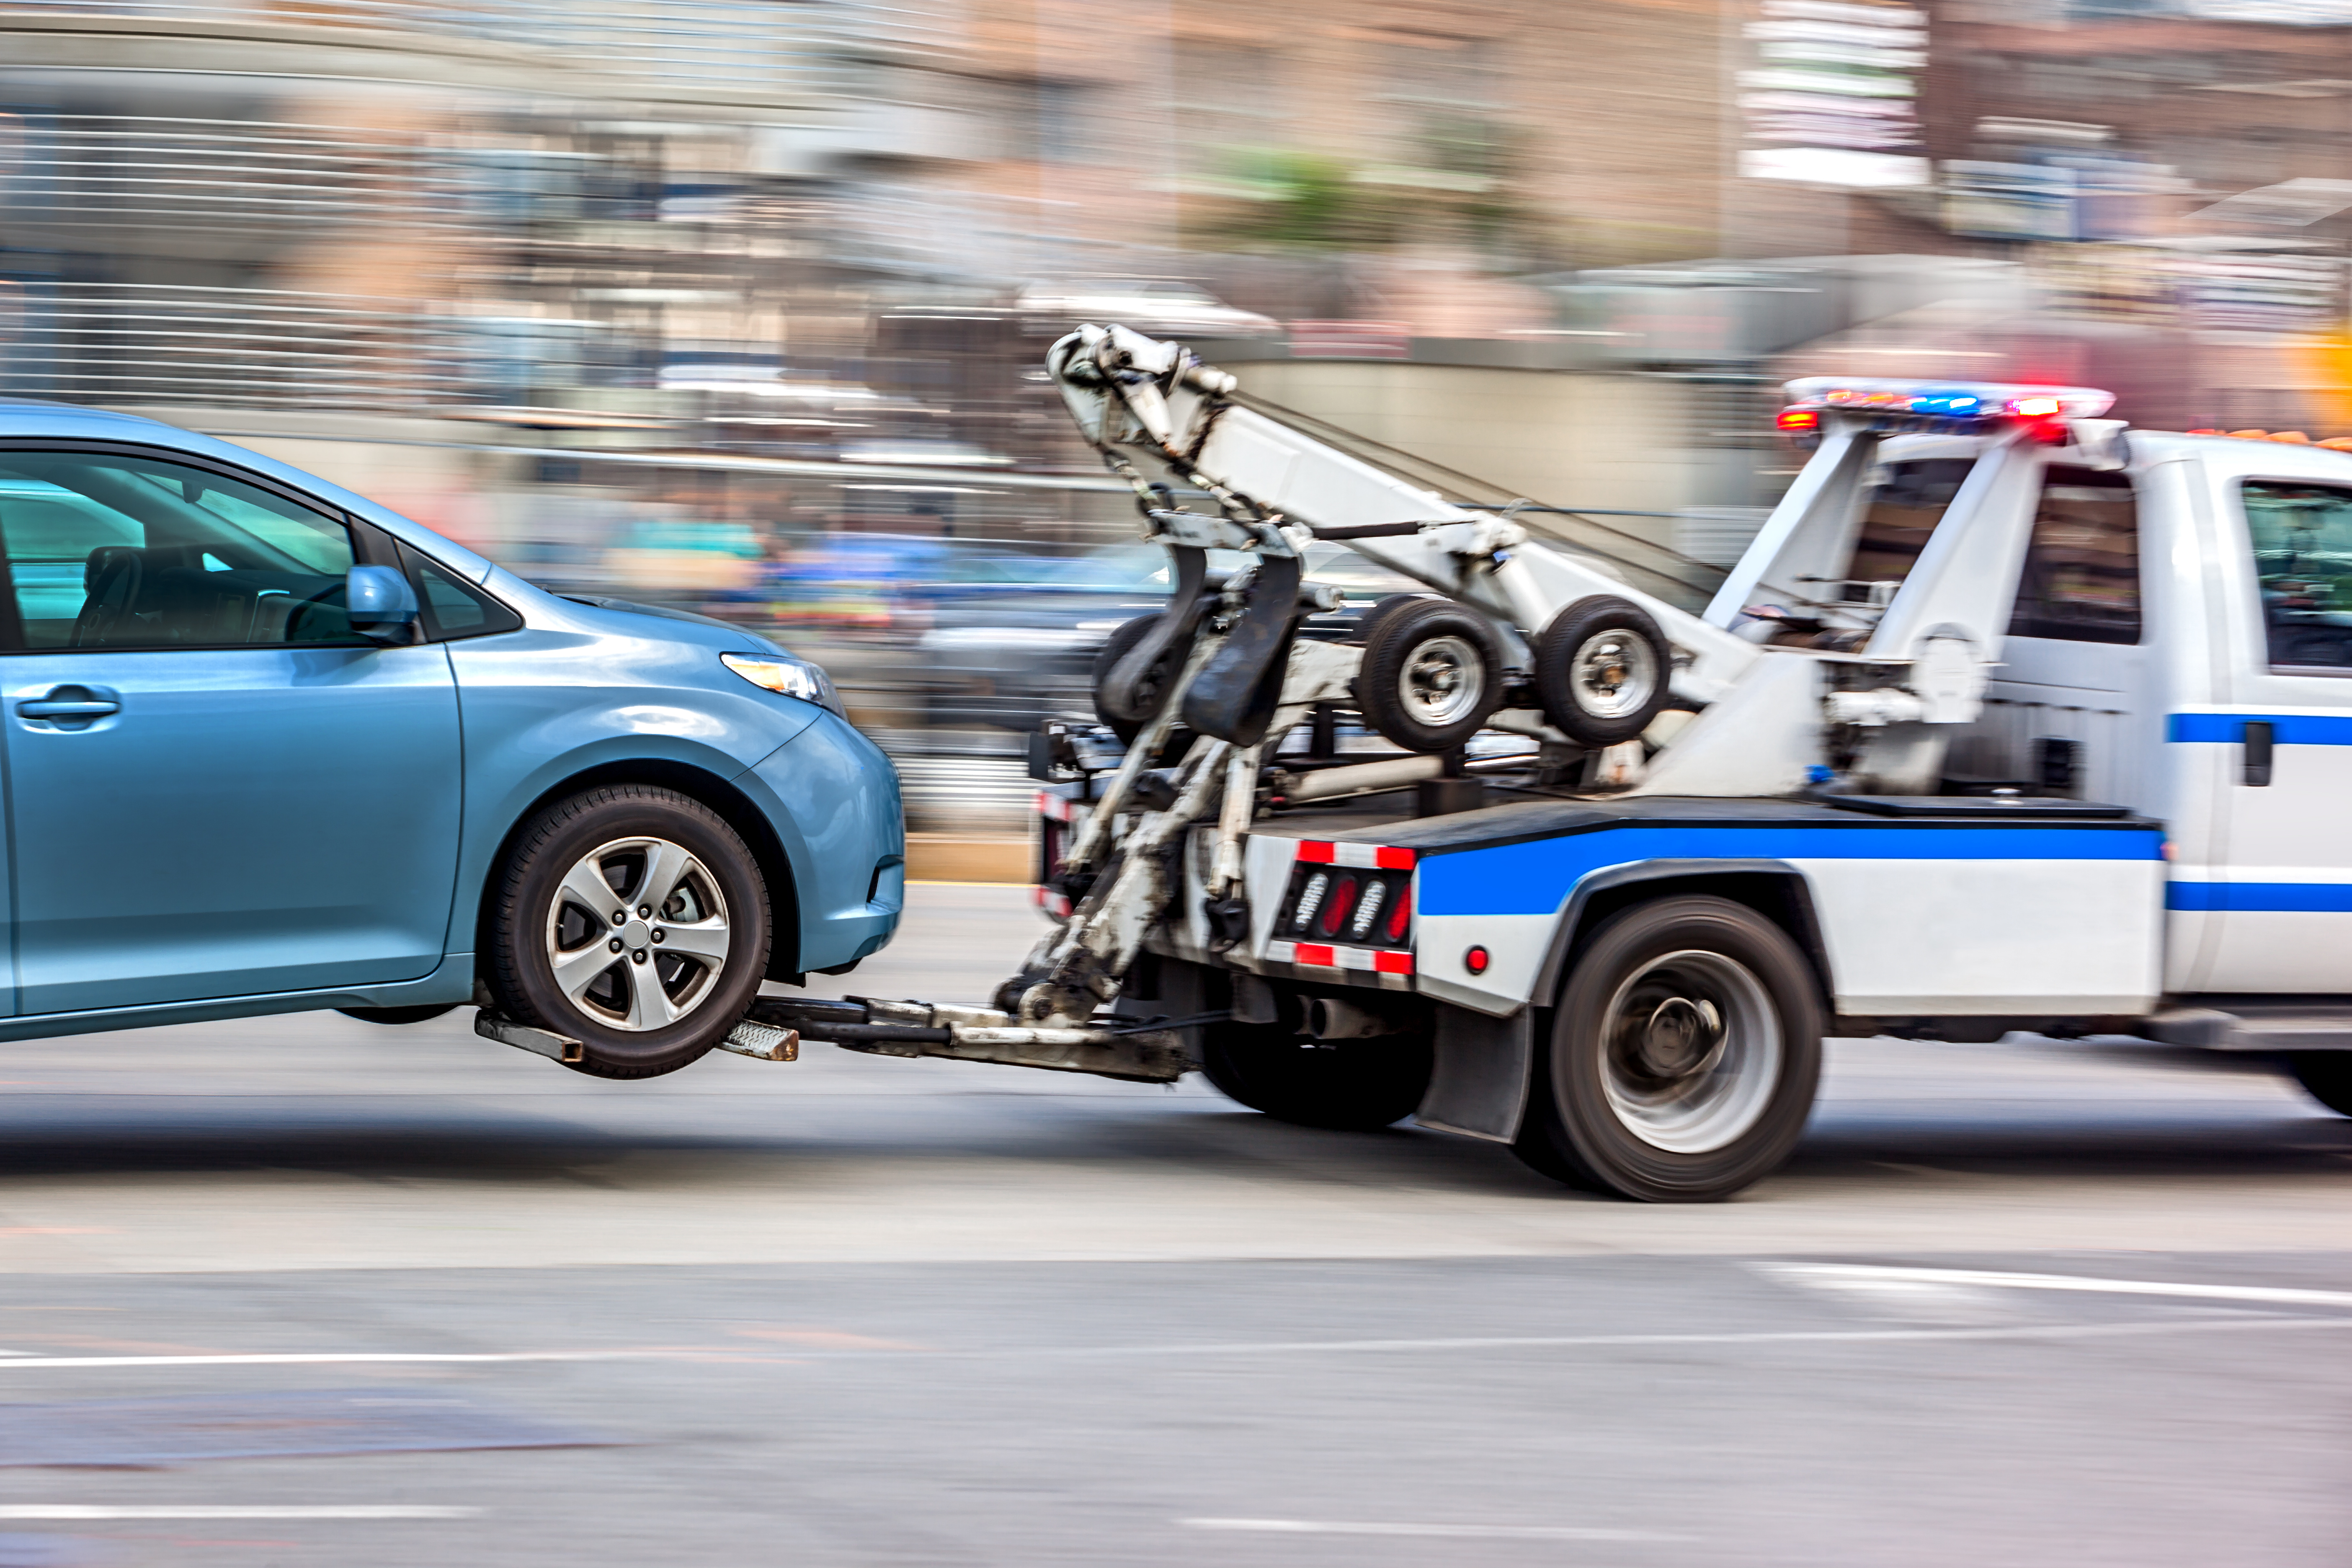 New law requires 24-hour notice before towing a vehicle - The